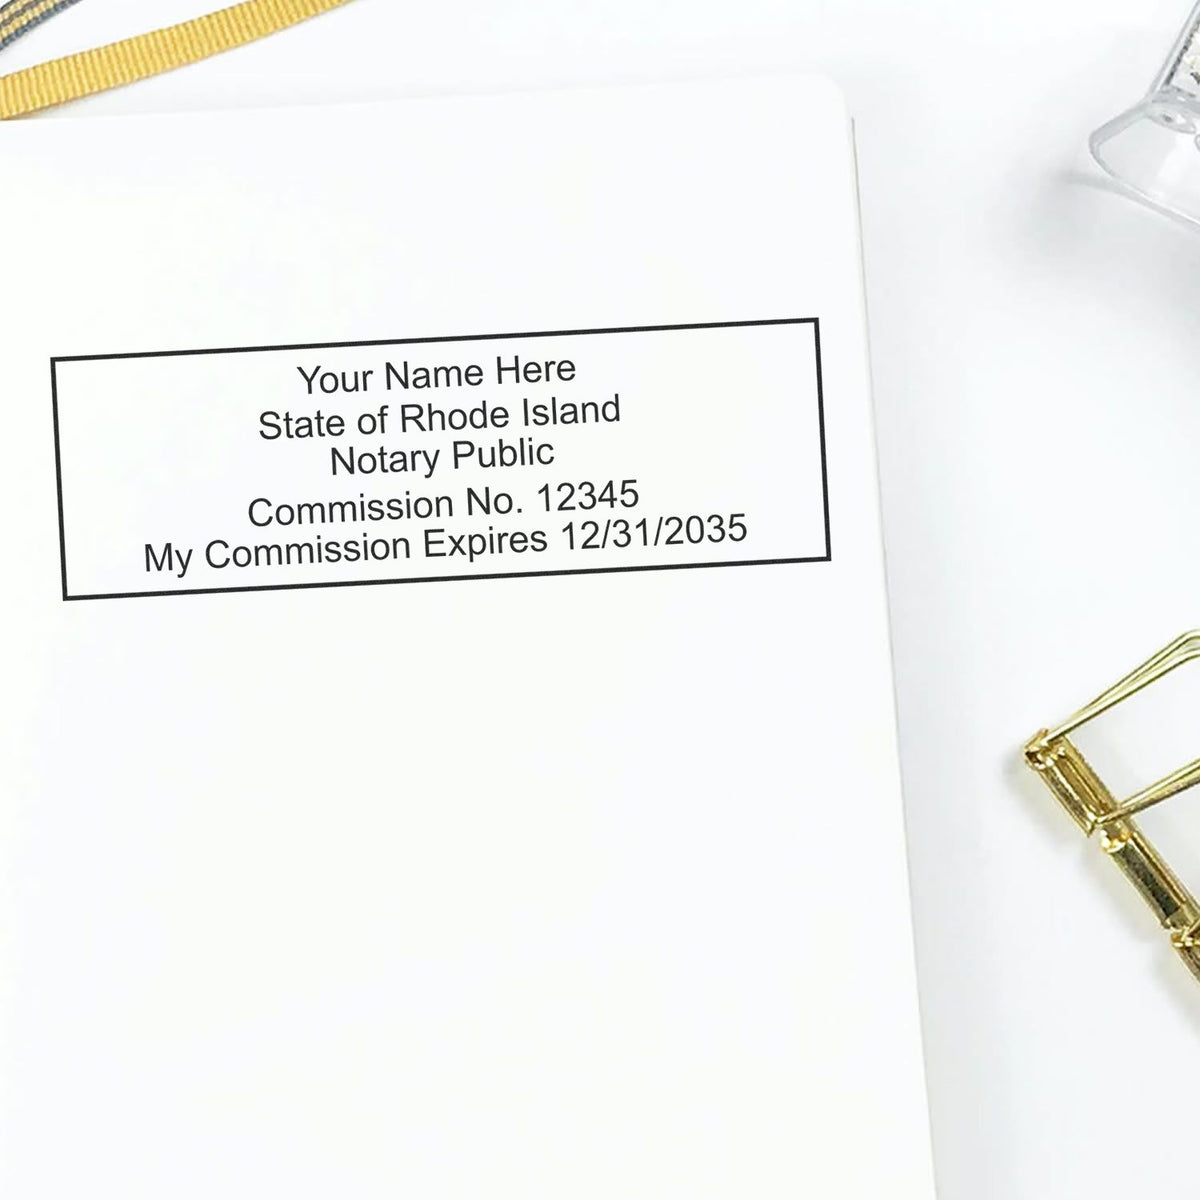 The Slim Pre-Inked Rectangular Notary Stamp for Rhode Island stamp impression comes to life with a crisp, detailed photo on paper - showcasing true professional quality.